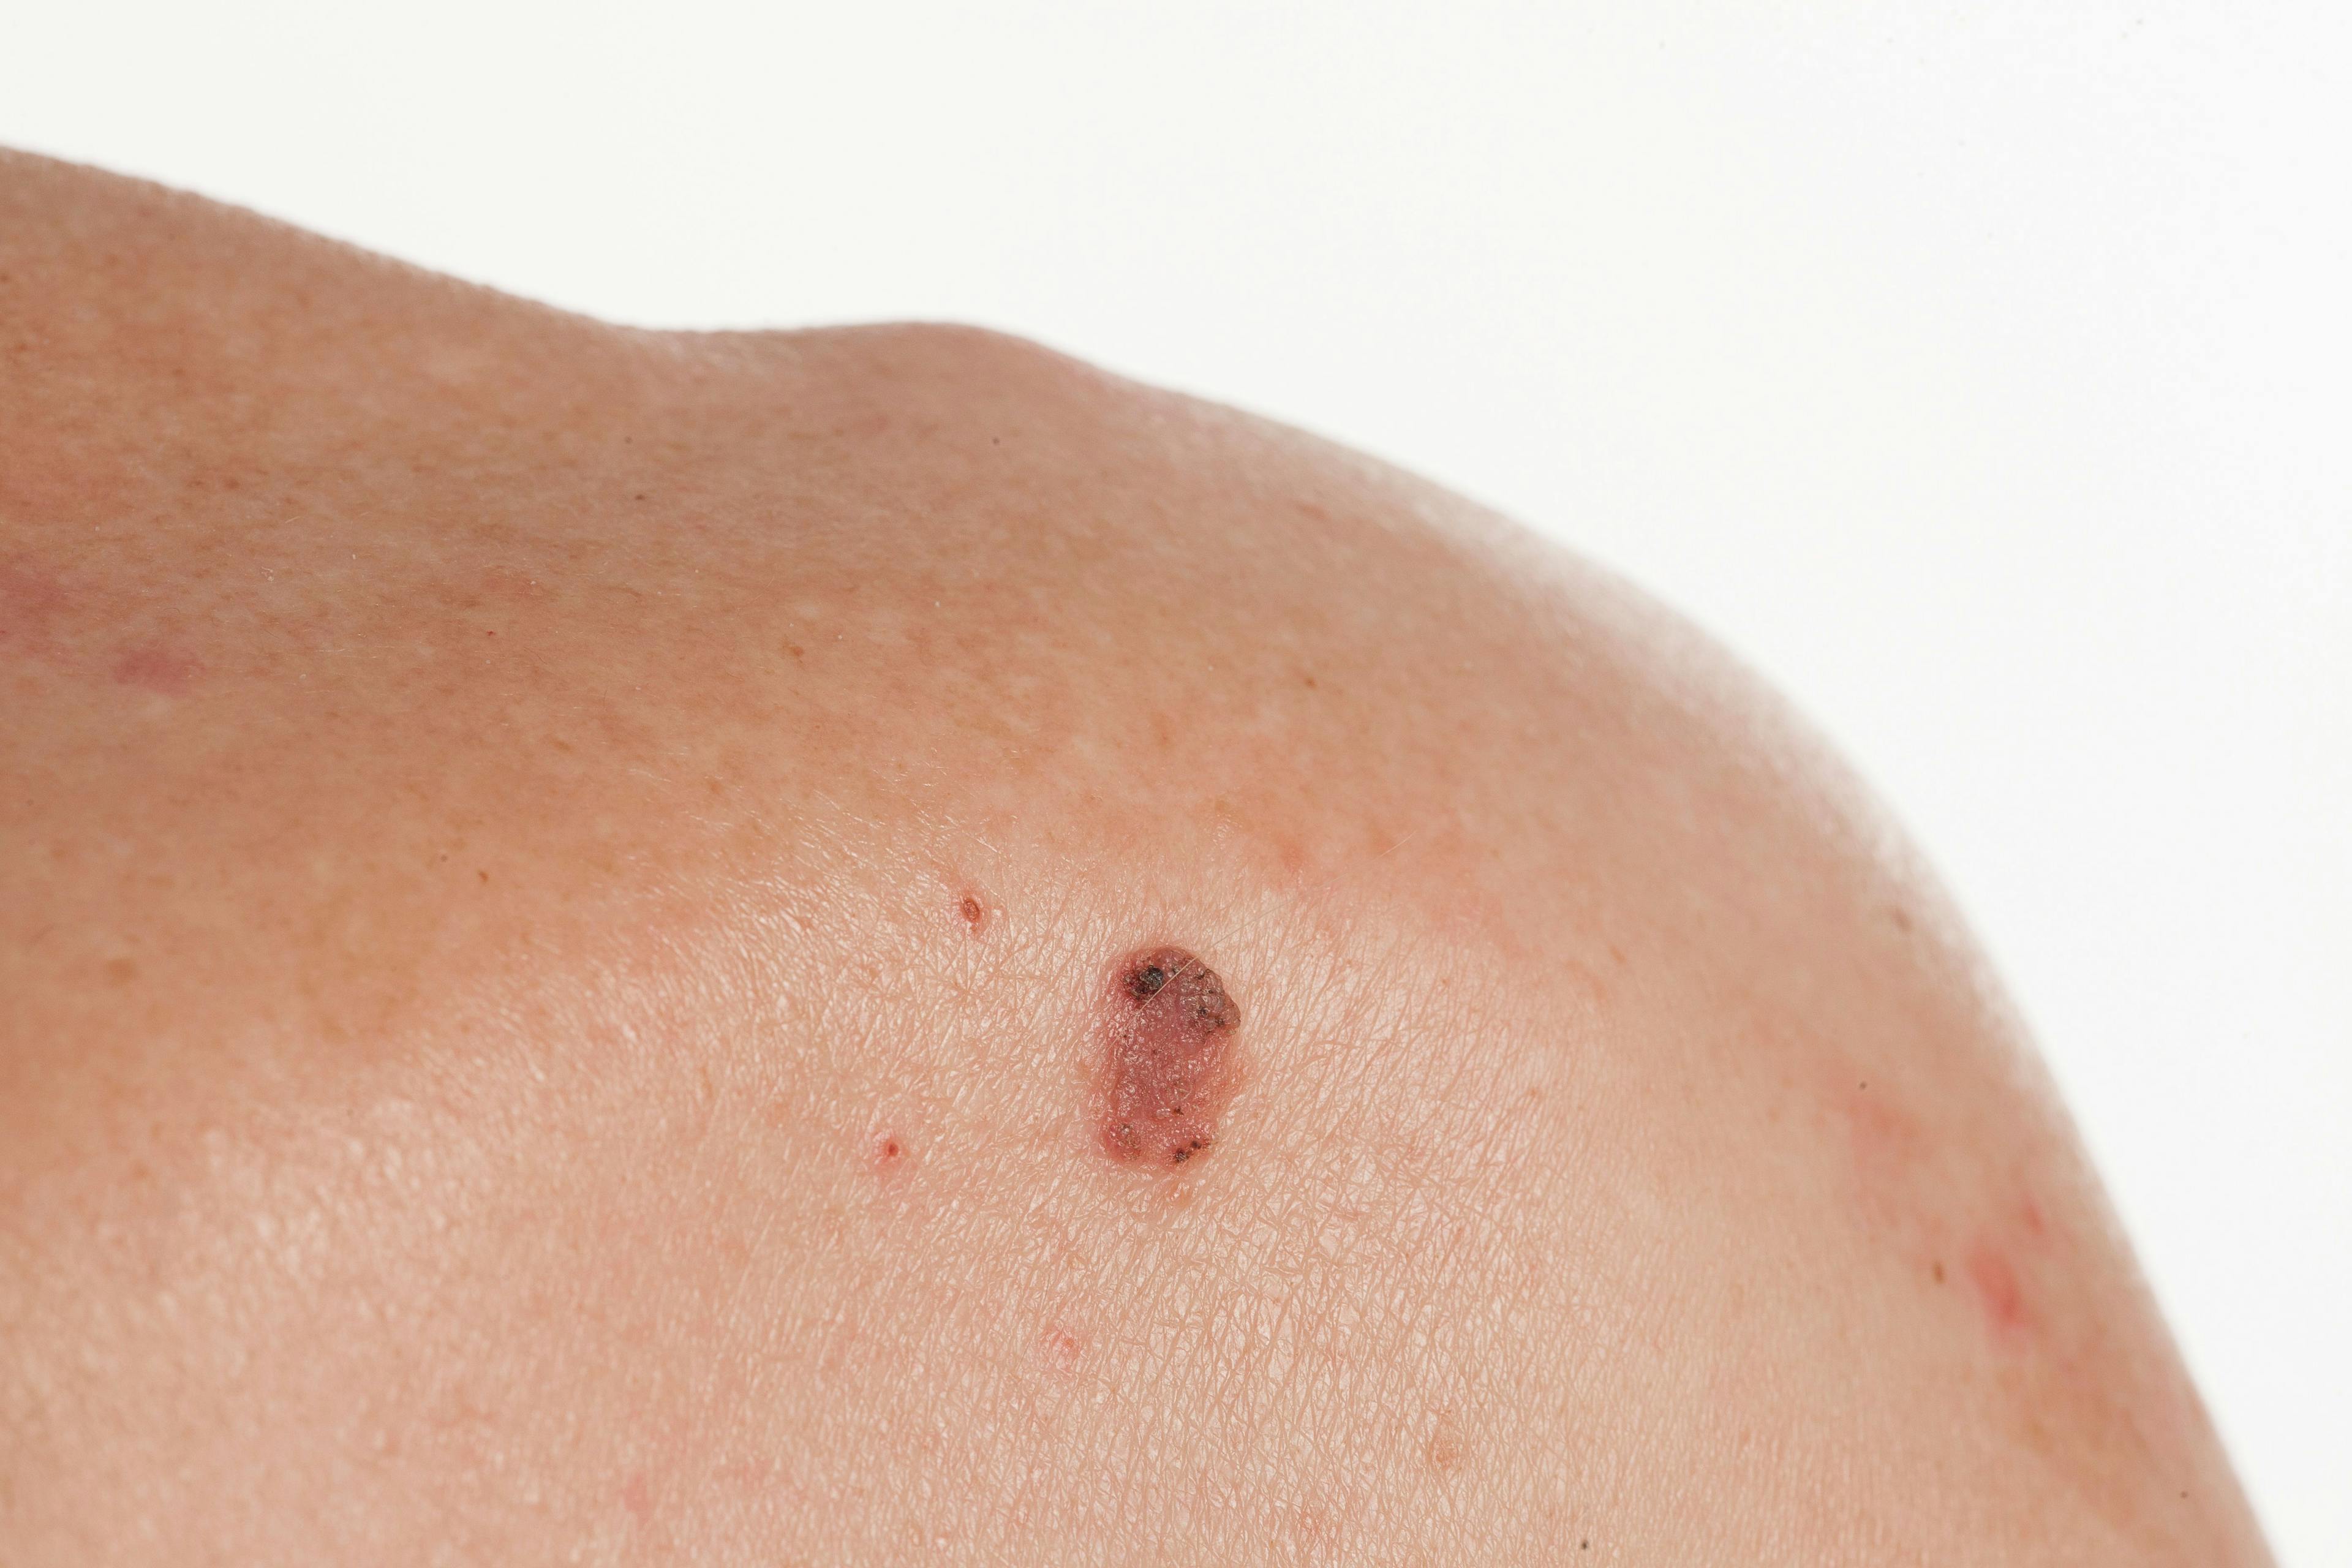 Keratinizing squamous cell carcinoma of the skin. Credit: 2707195204 - stock.adobe.com